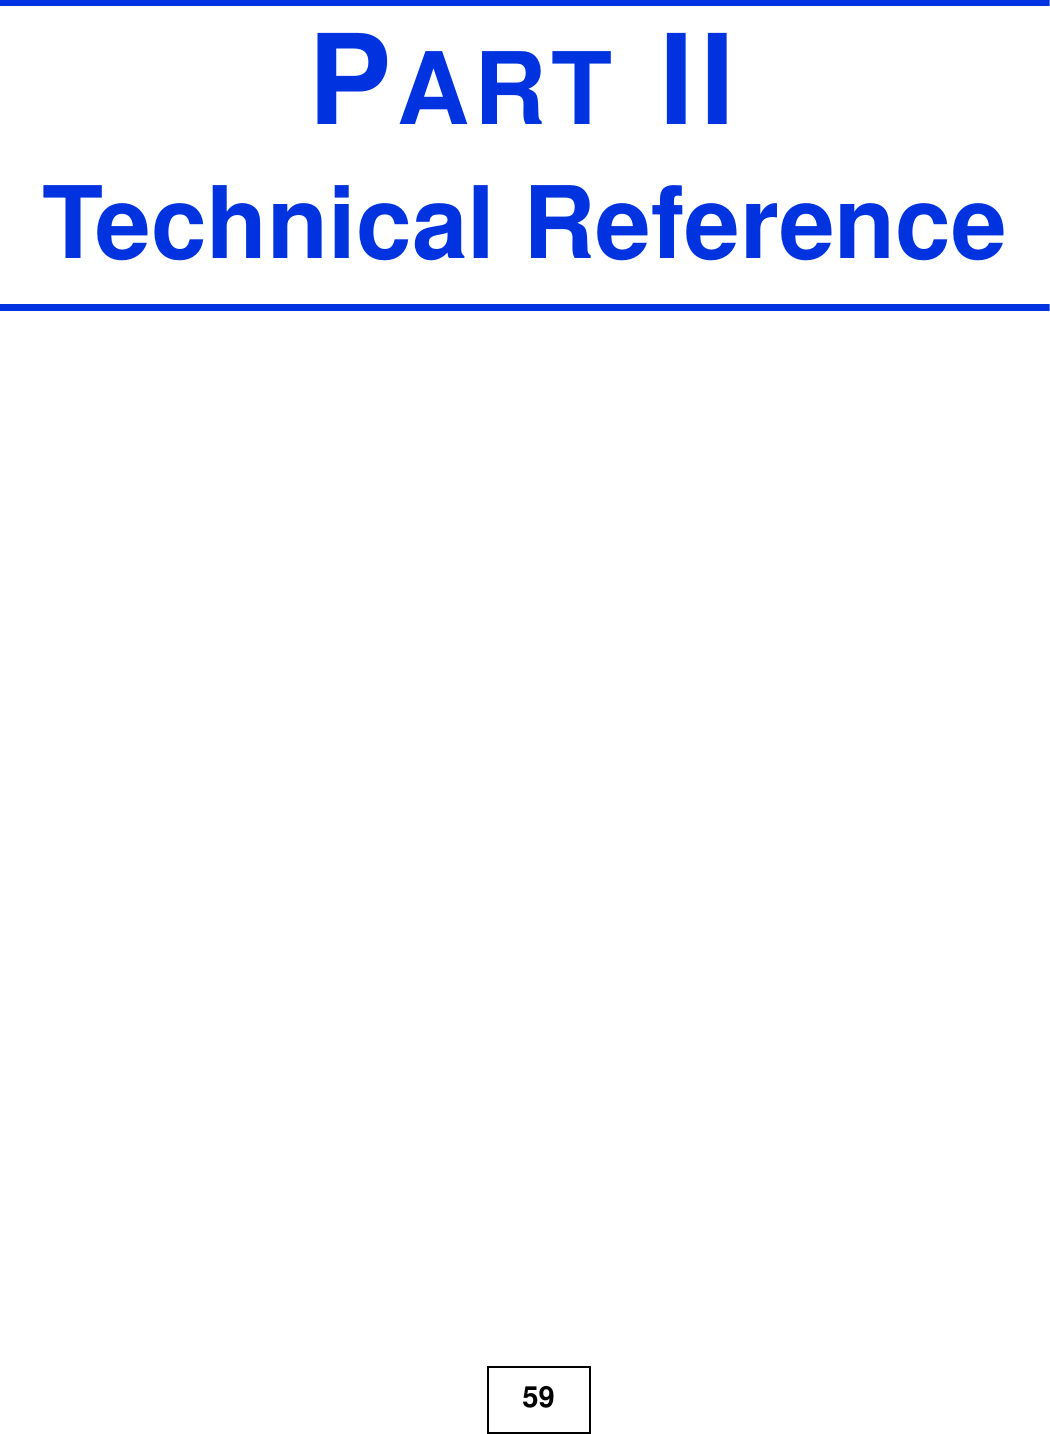 59PART IITechnical Reference